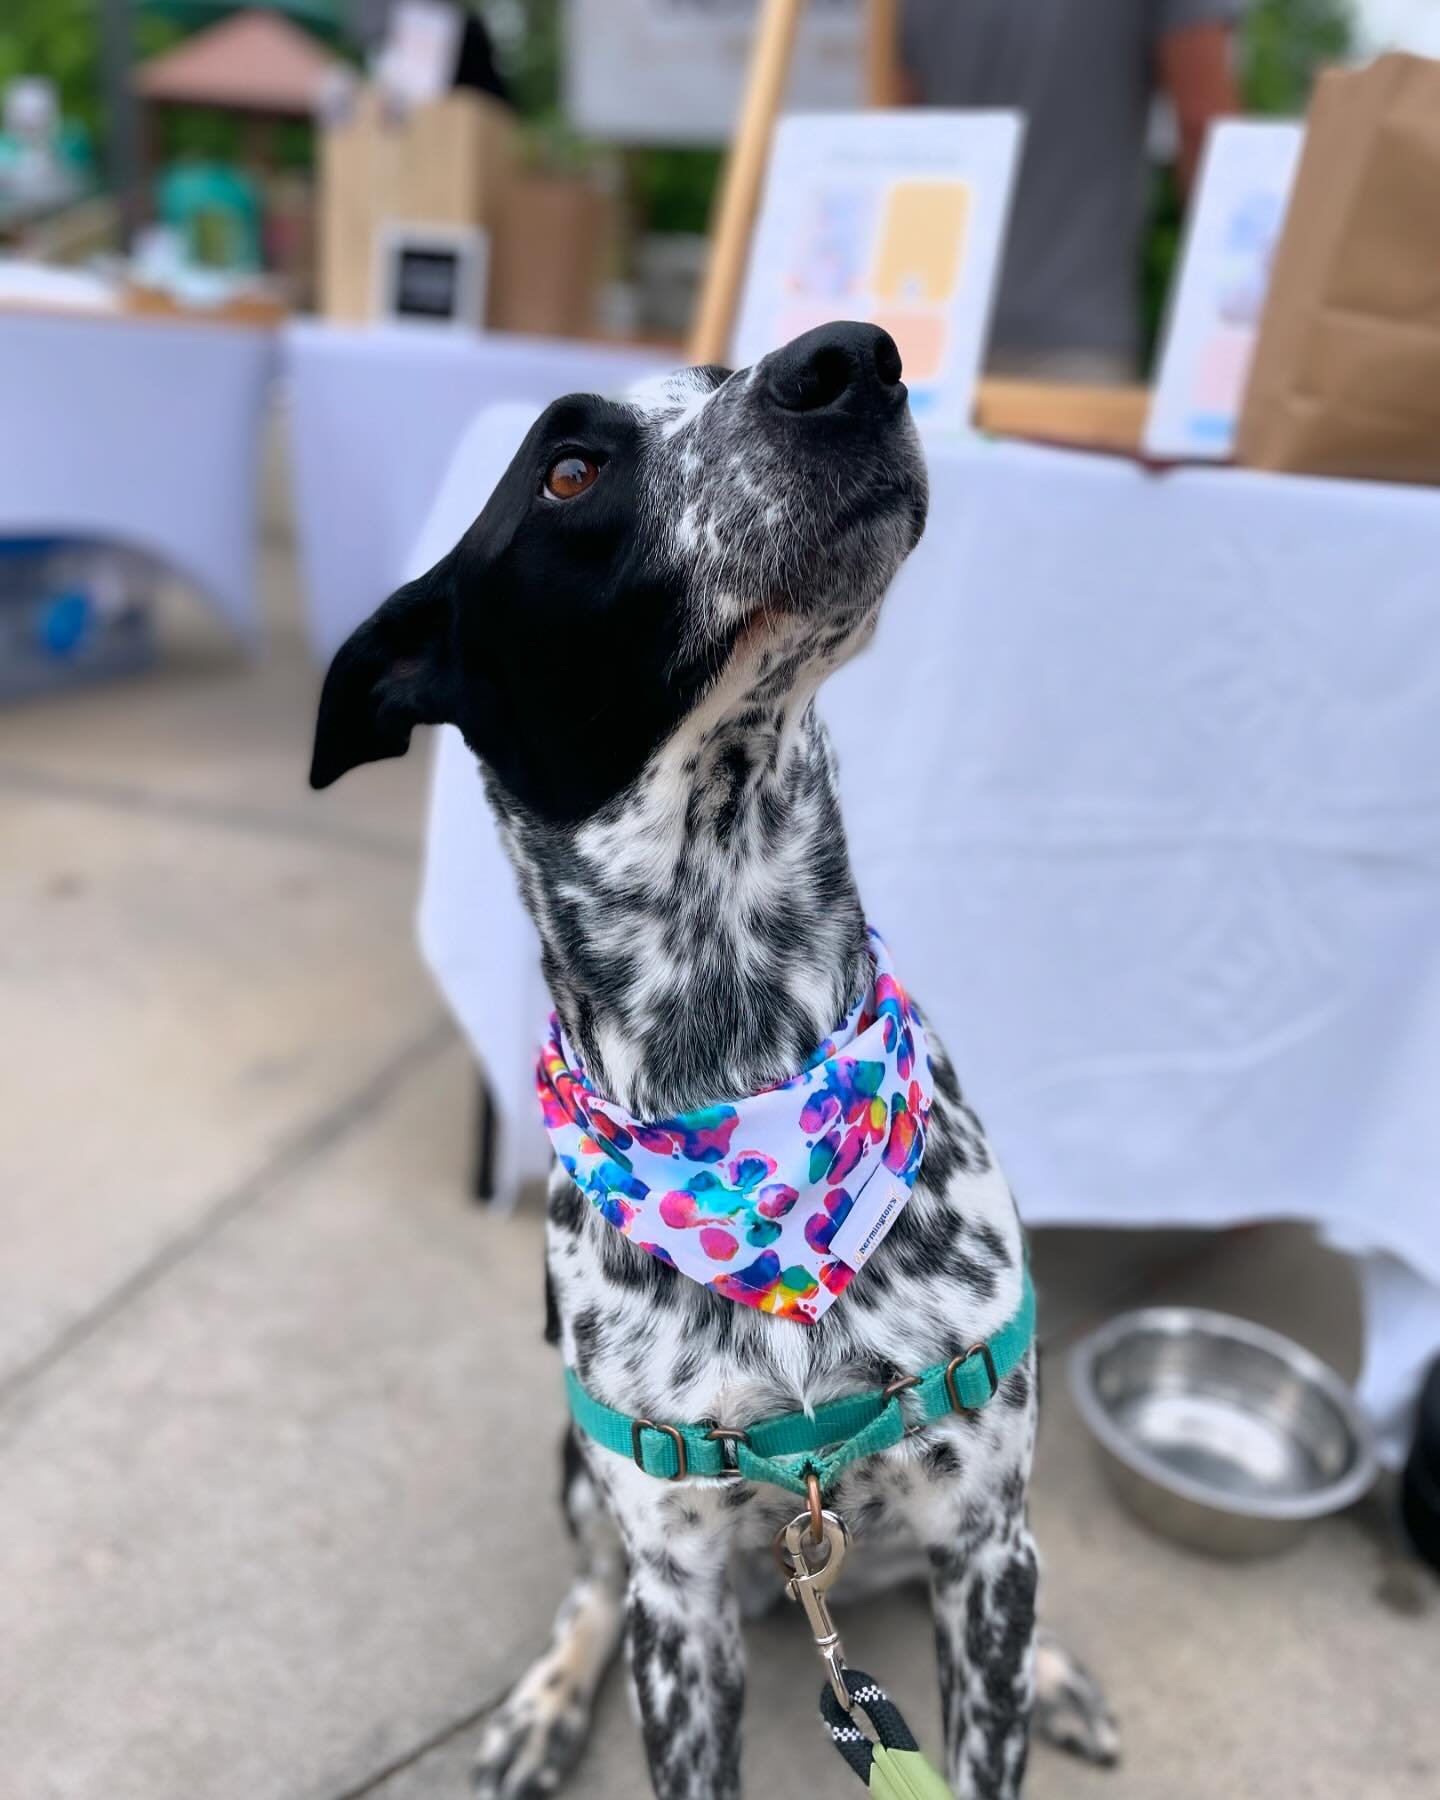 Happy Wednesday puppers! 🐶 who&rsquo;s excited to see our Fourth of July collection?! 🙋&zwj;♀️

Sneak peek coming next week!
.
.
.
.
.
#dogdaysofsummer #dogsinbandanas #stylishdog #dogmomma #dogsofinstagram #gooddogsofgreenville